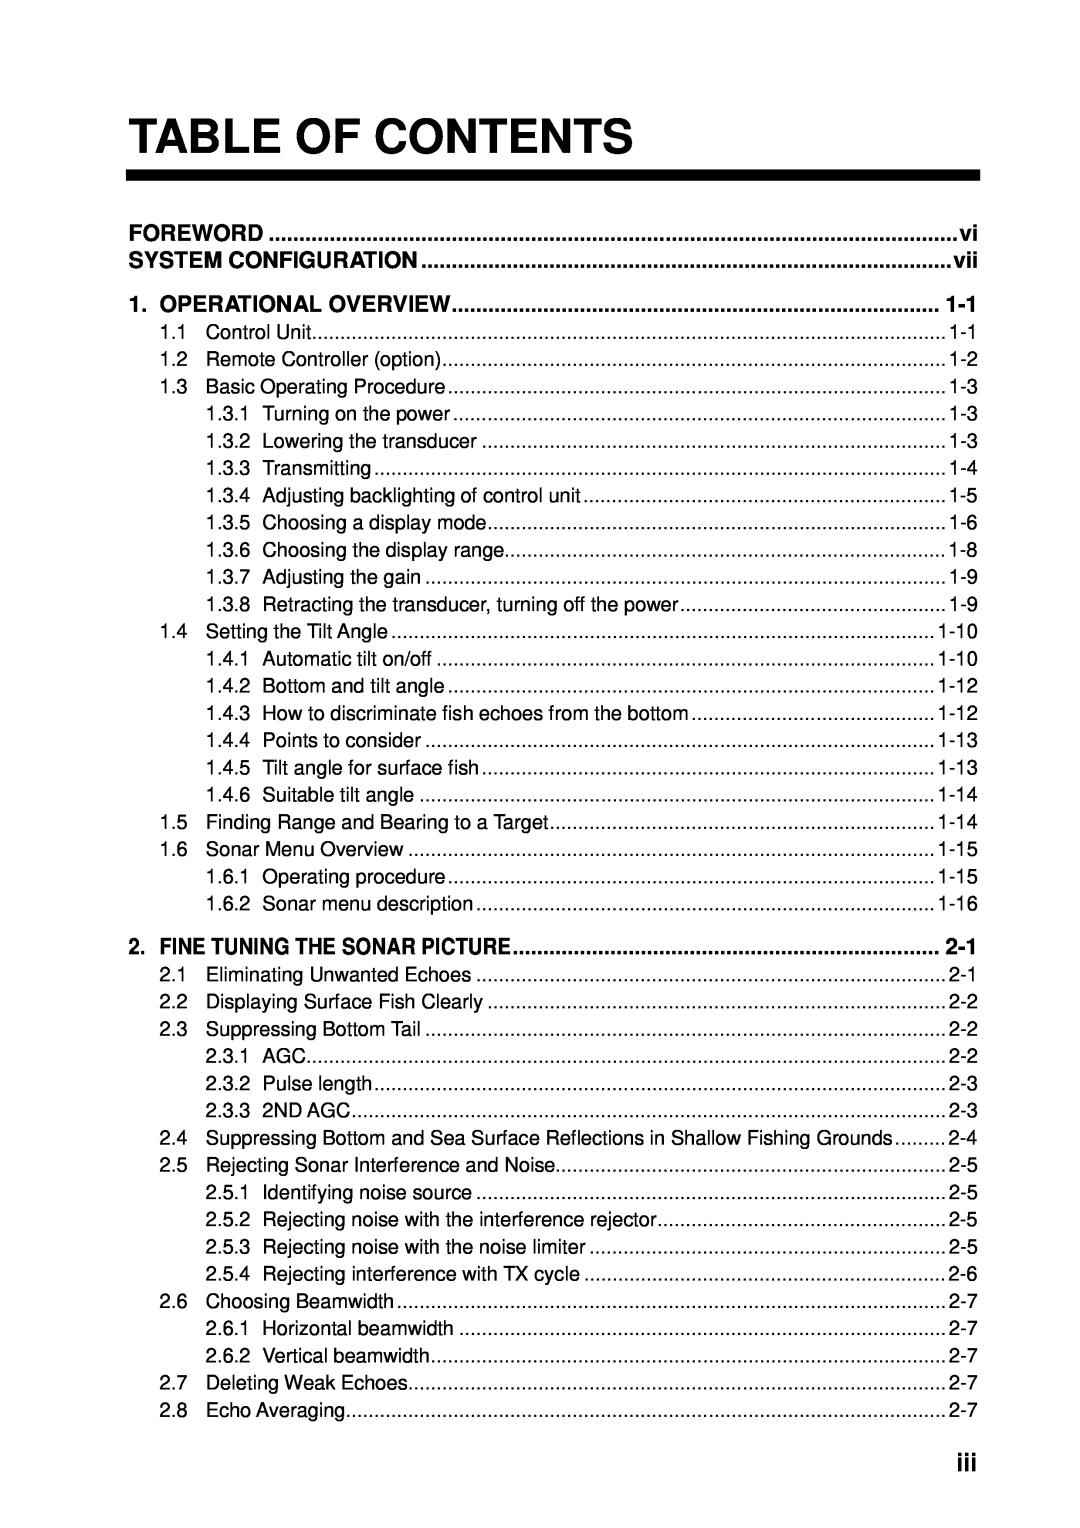 Furuno CSH-5L/CSH-8L manual Table Of Contents, Foreword, System Configuration, Operational Overview 